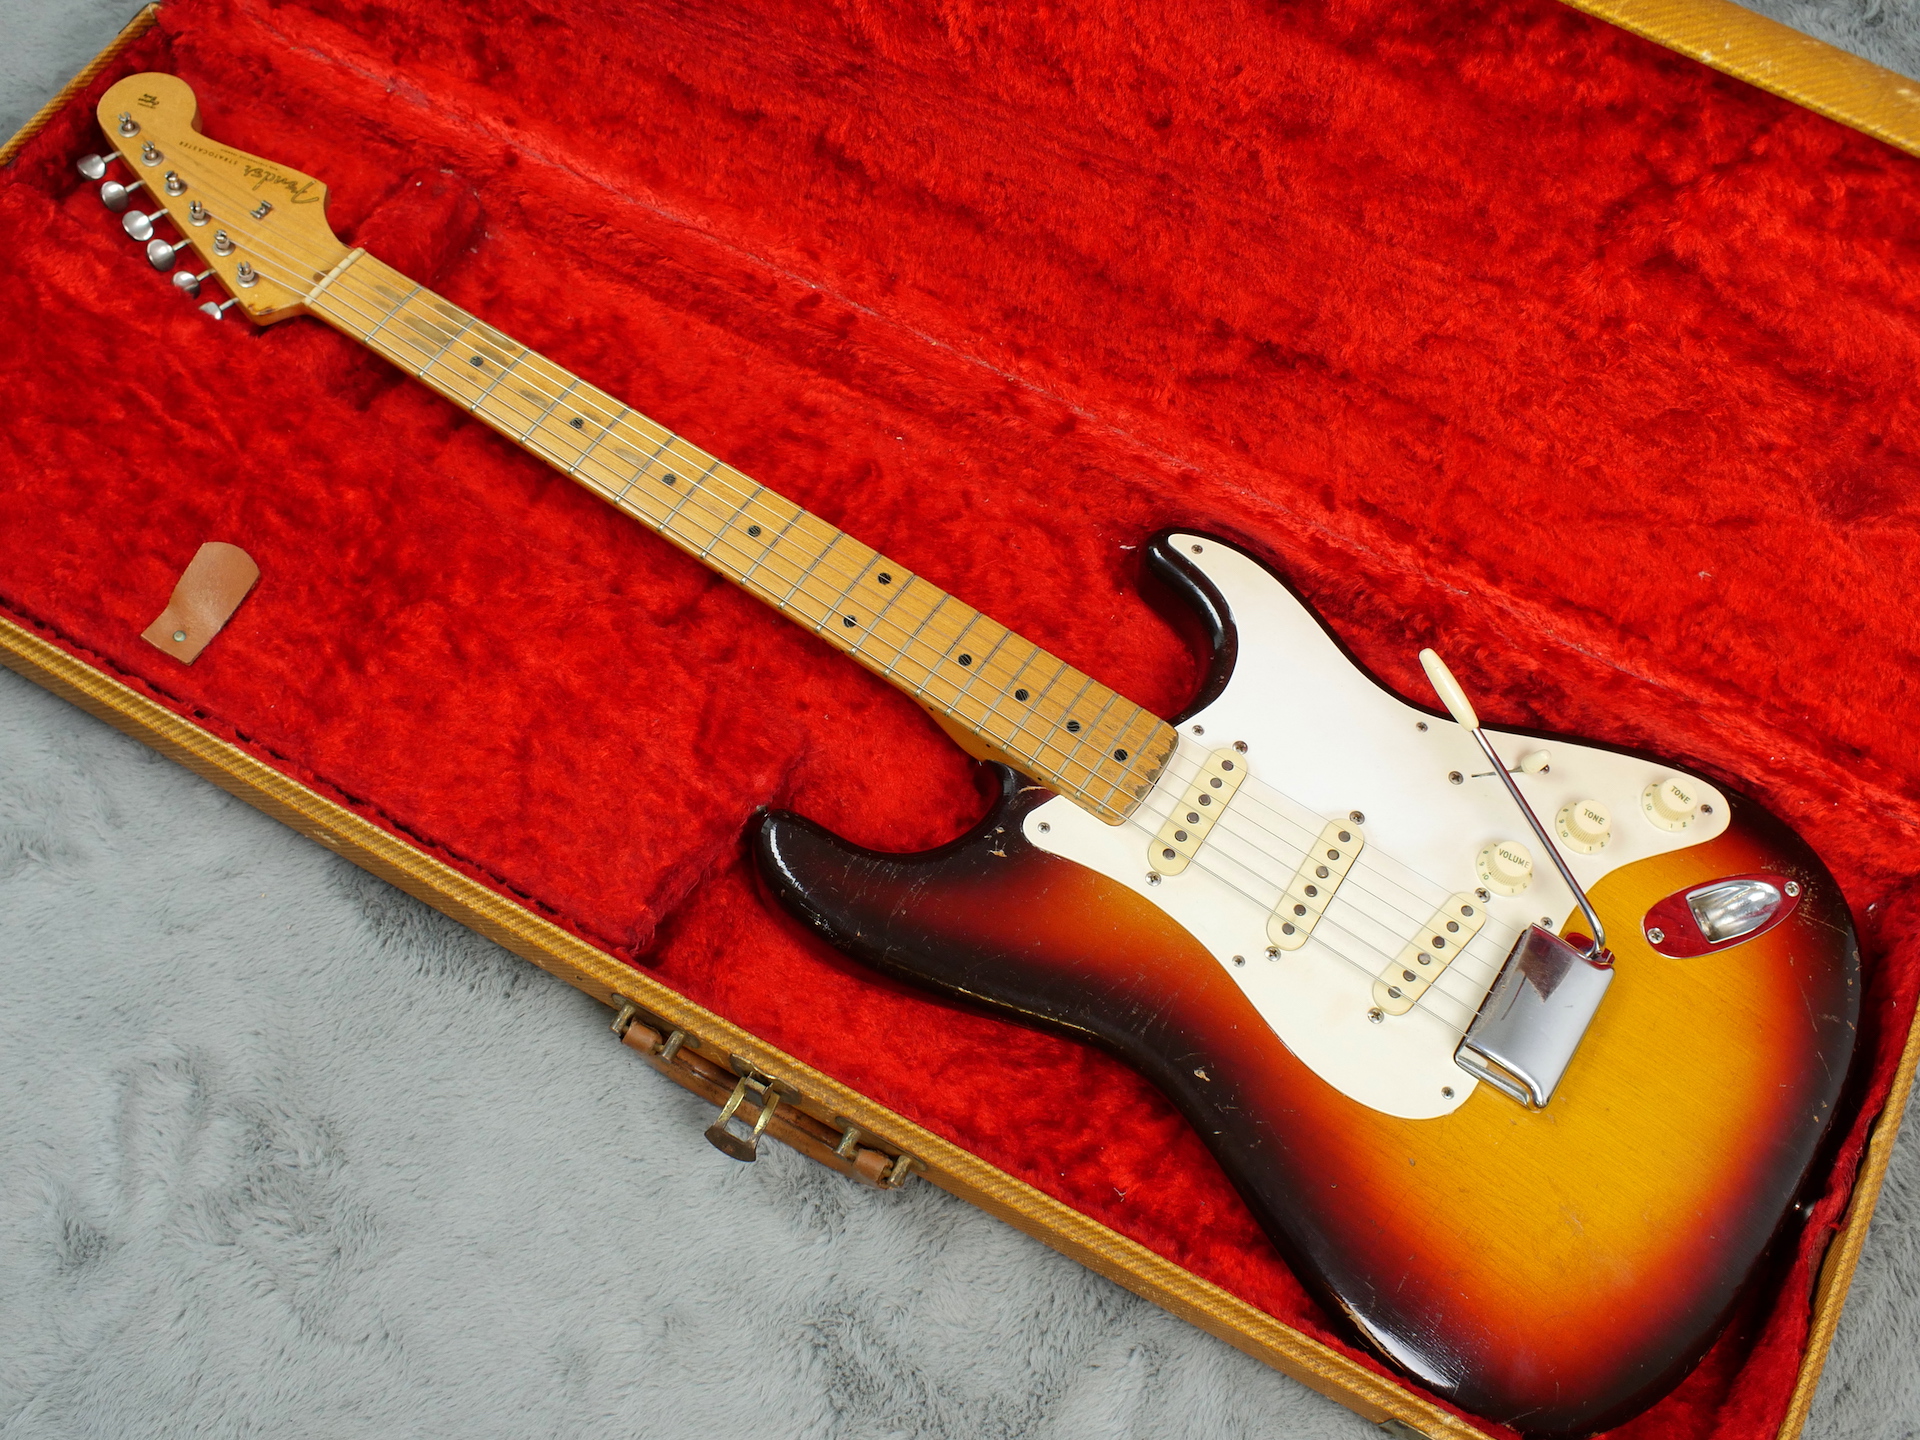 Mouthwash Or either Uplifted Fender Stratocaster 1958 Three-tone Sunburst Guitar For Sale ATB Guitars